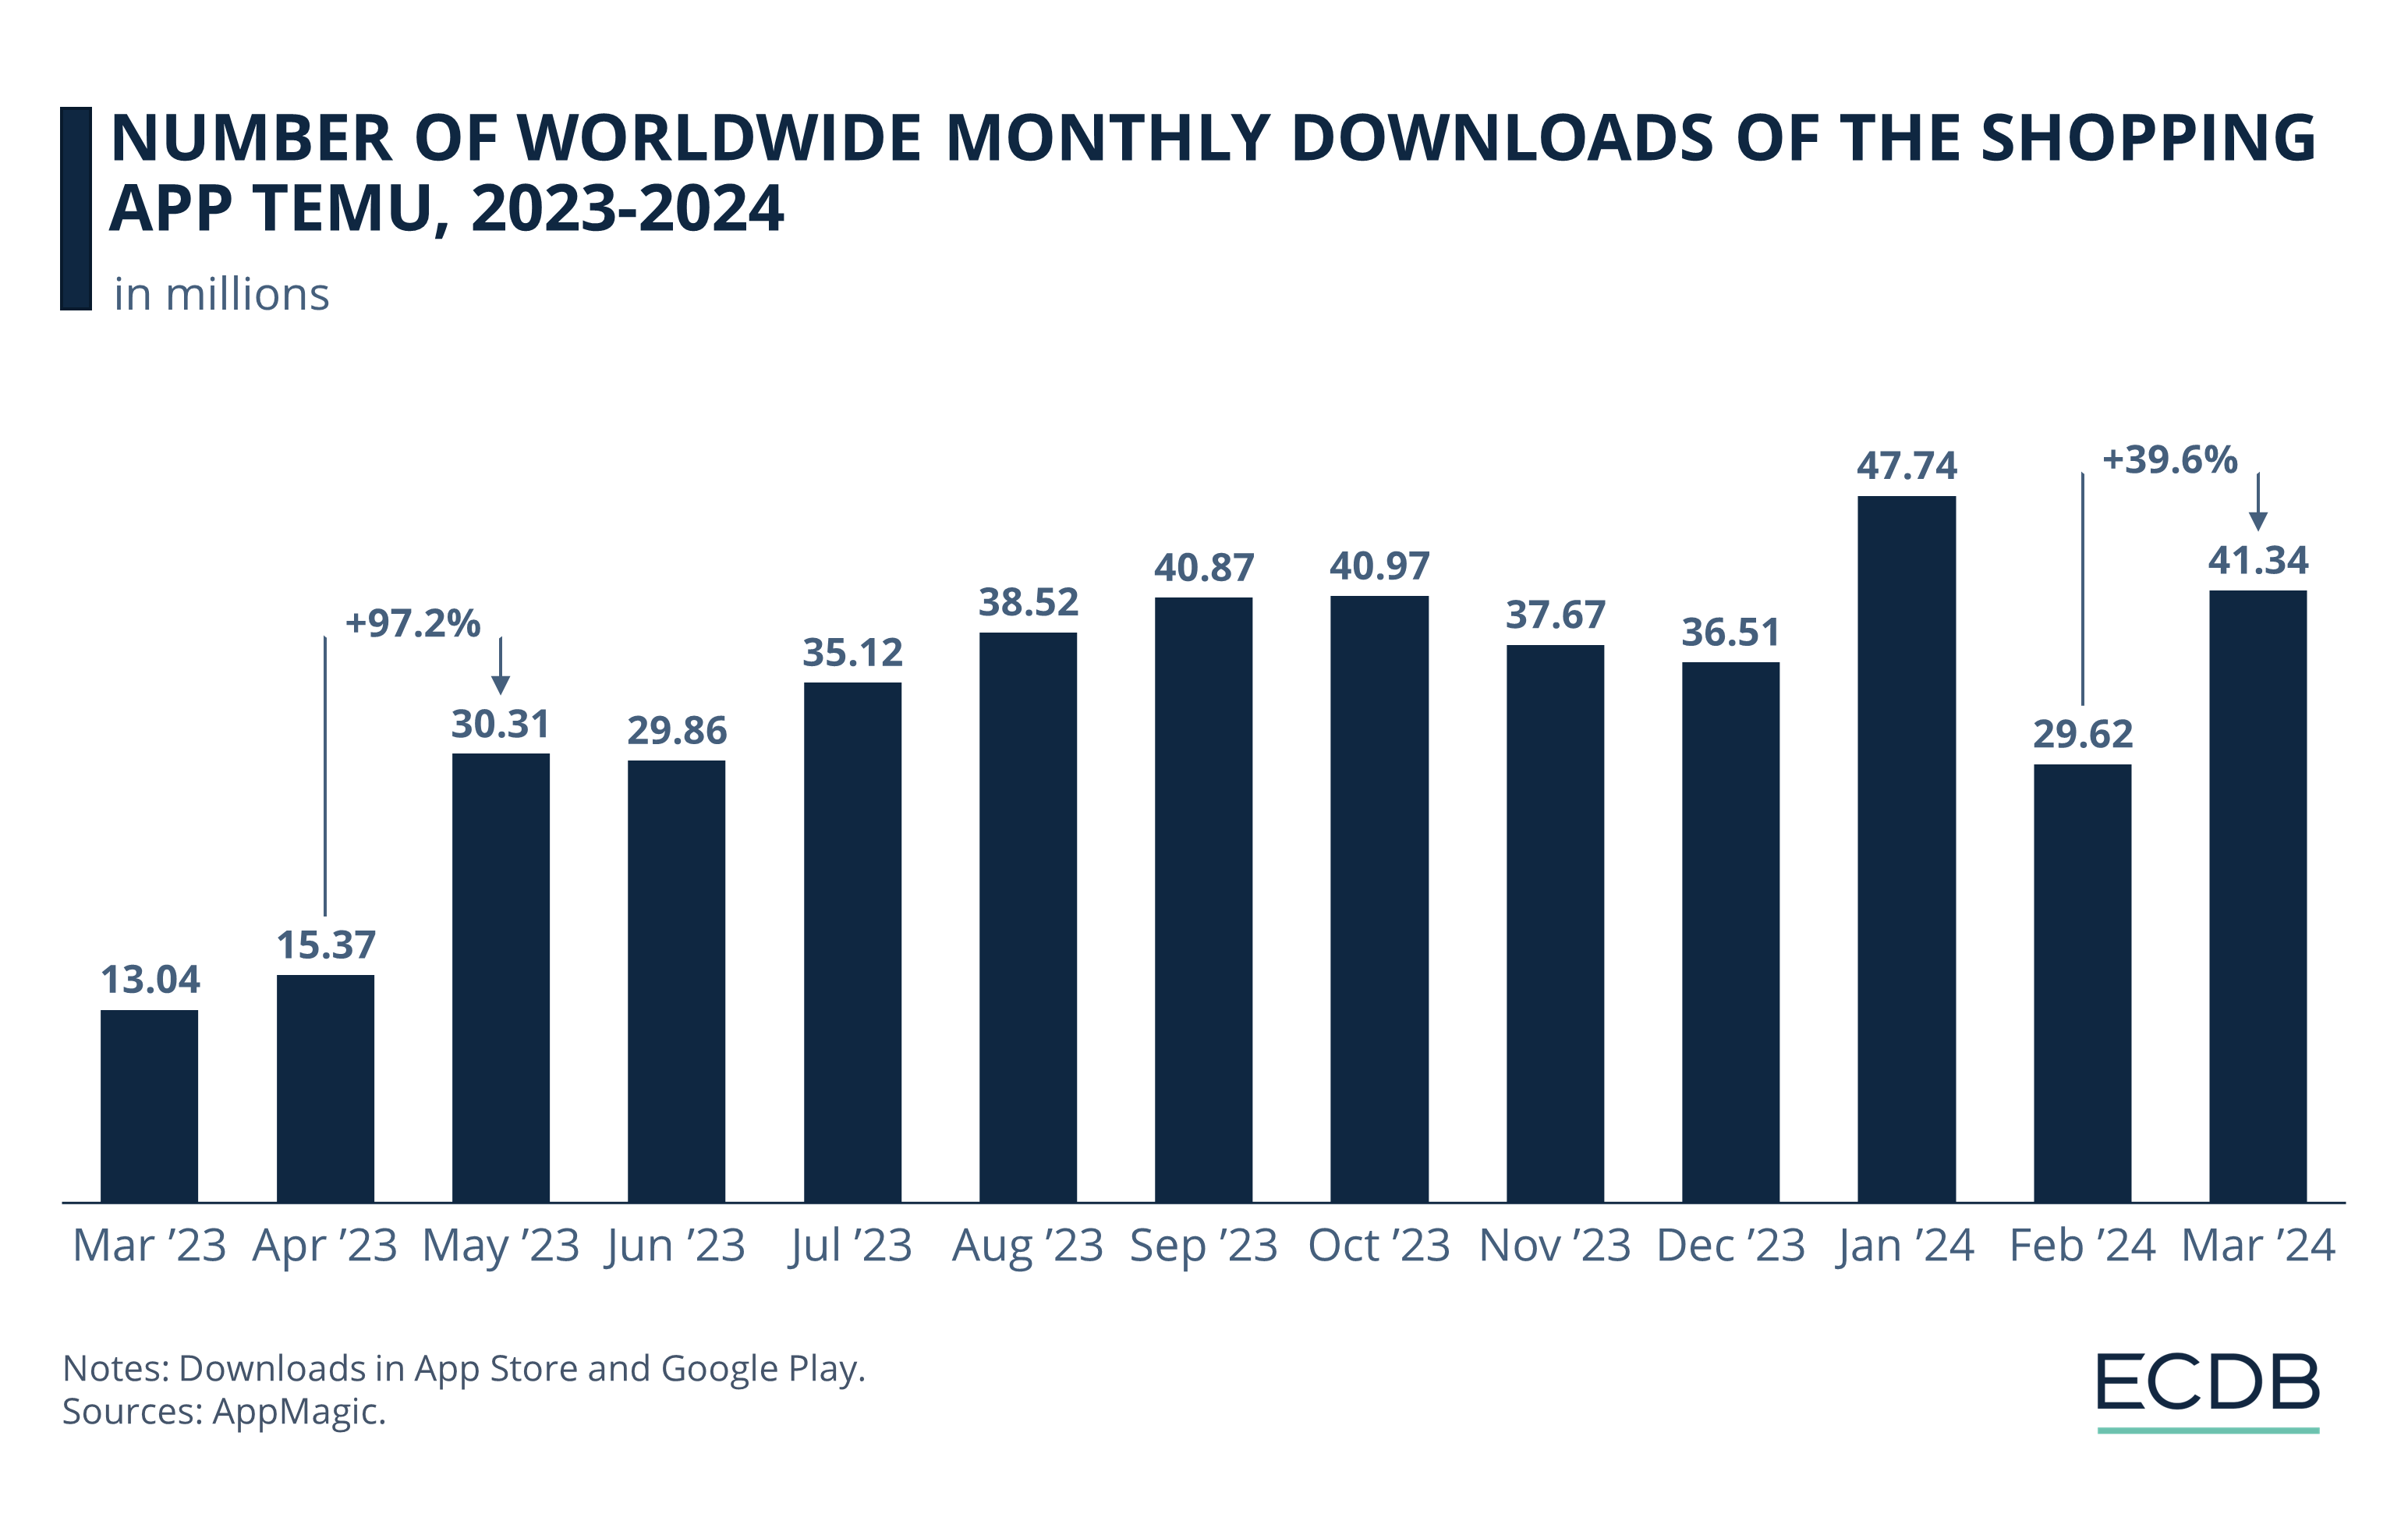 Number of Global Downloads of Shopping App Temu 2022-2023